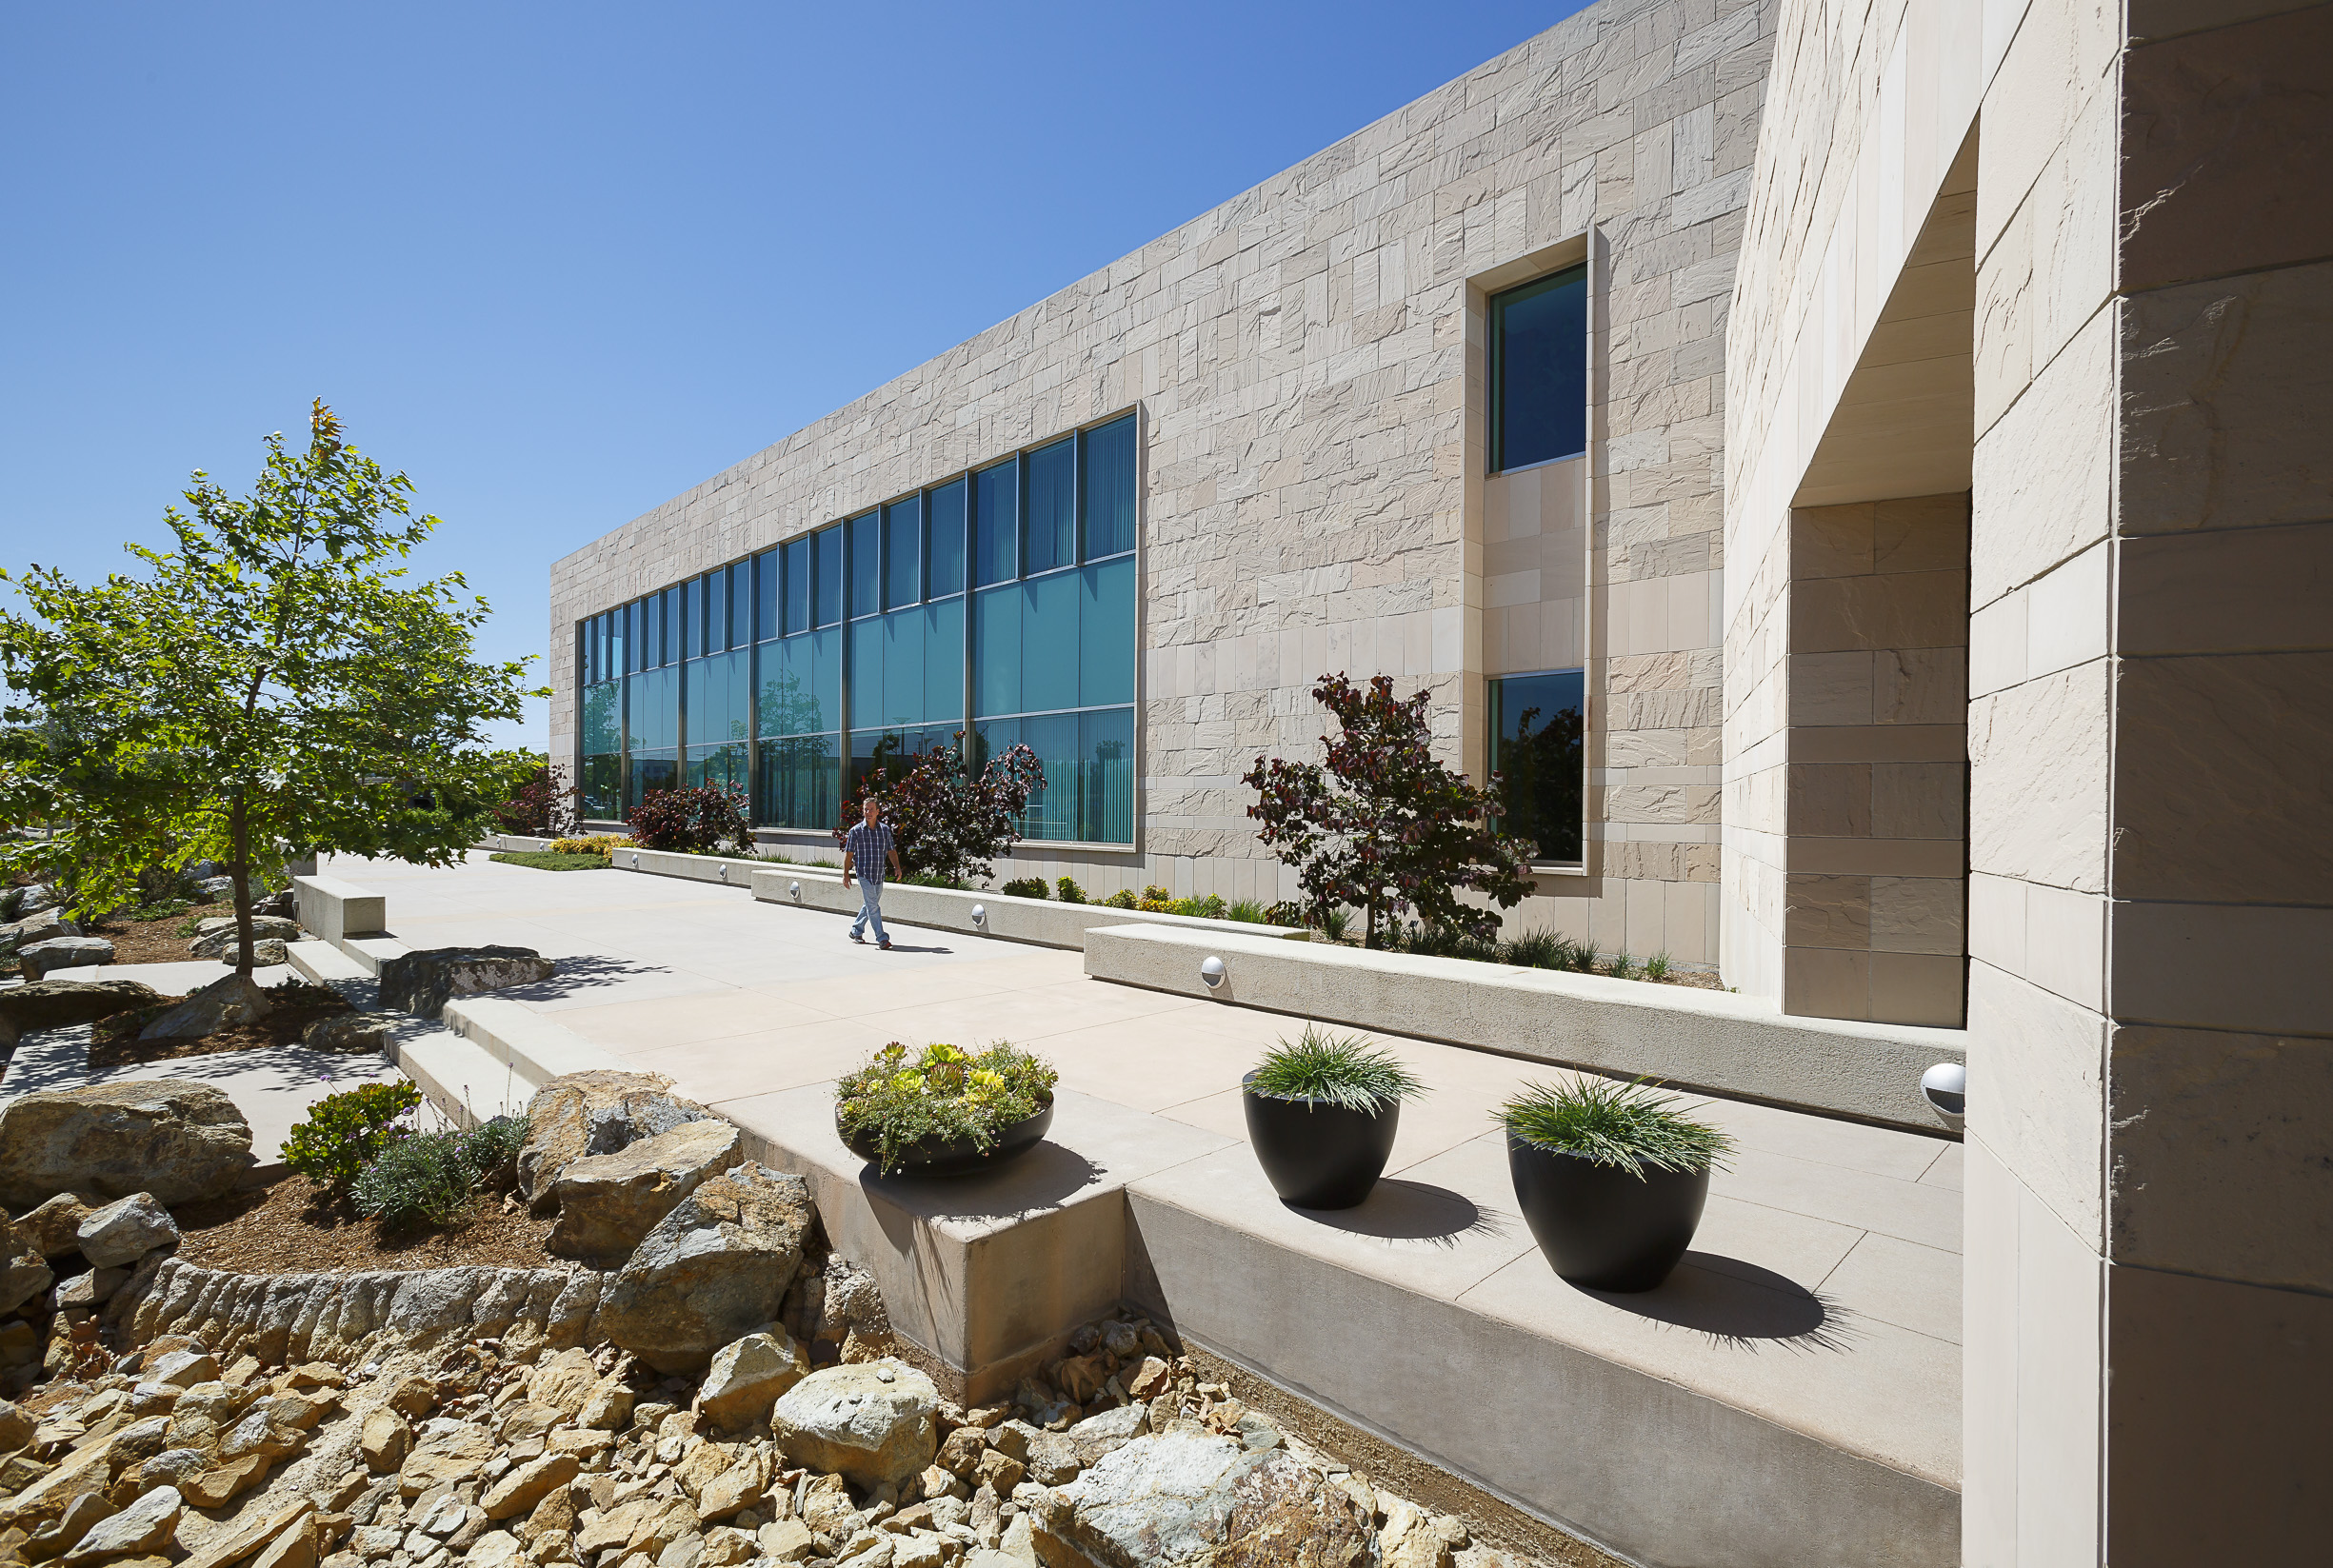 Many of the building’s sustainable features could be part of a sustainable discussion today such as drought-tolerant planting.